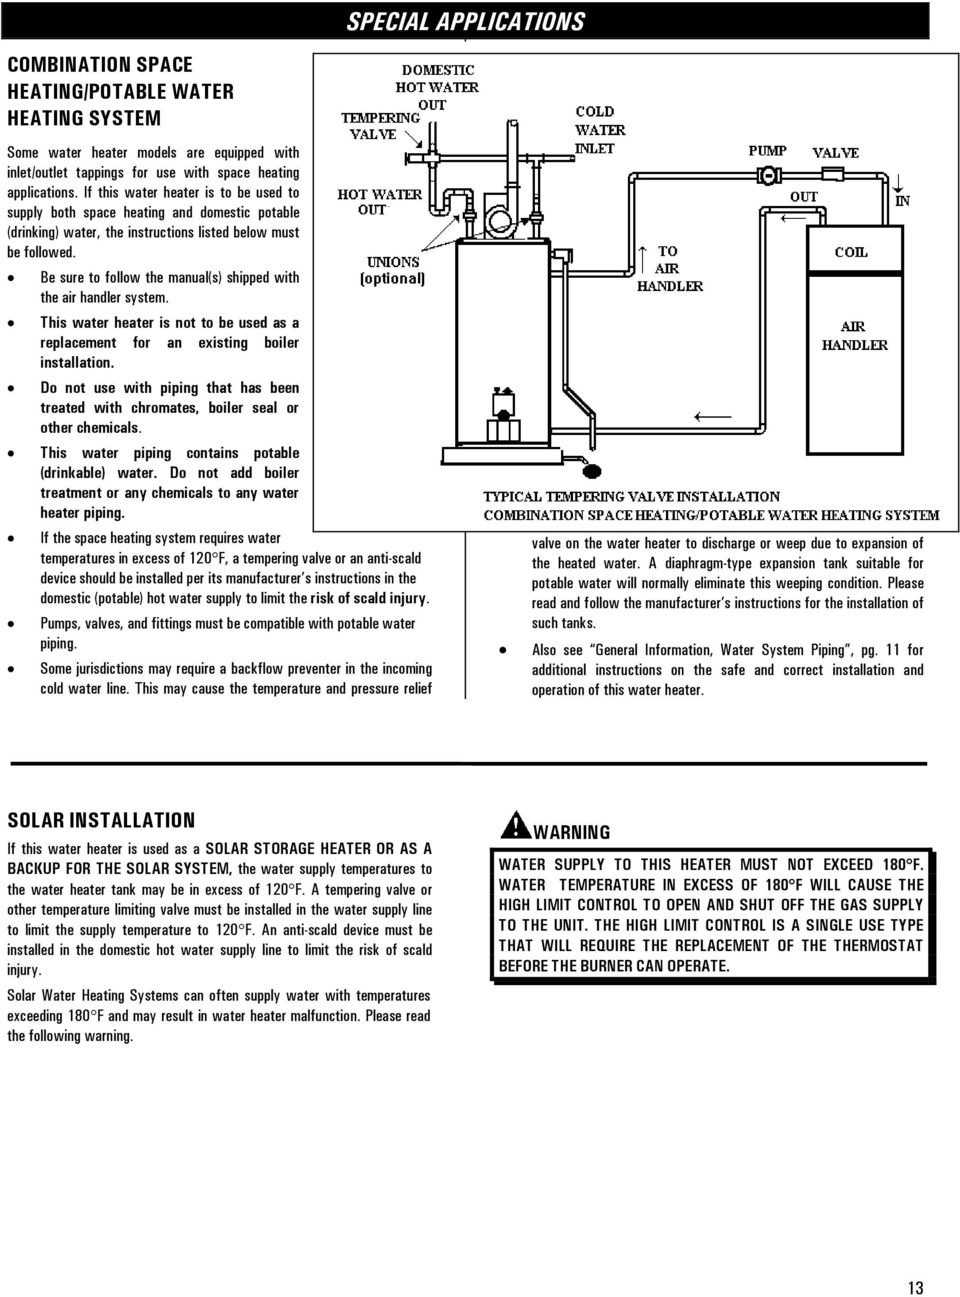 Be sure to follow the manual(s) shipped with the air handler system. This water heater is not to be used as a replacement for an existing boiler installation.